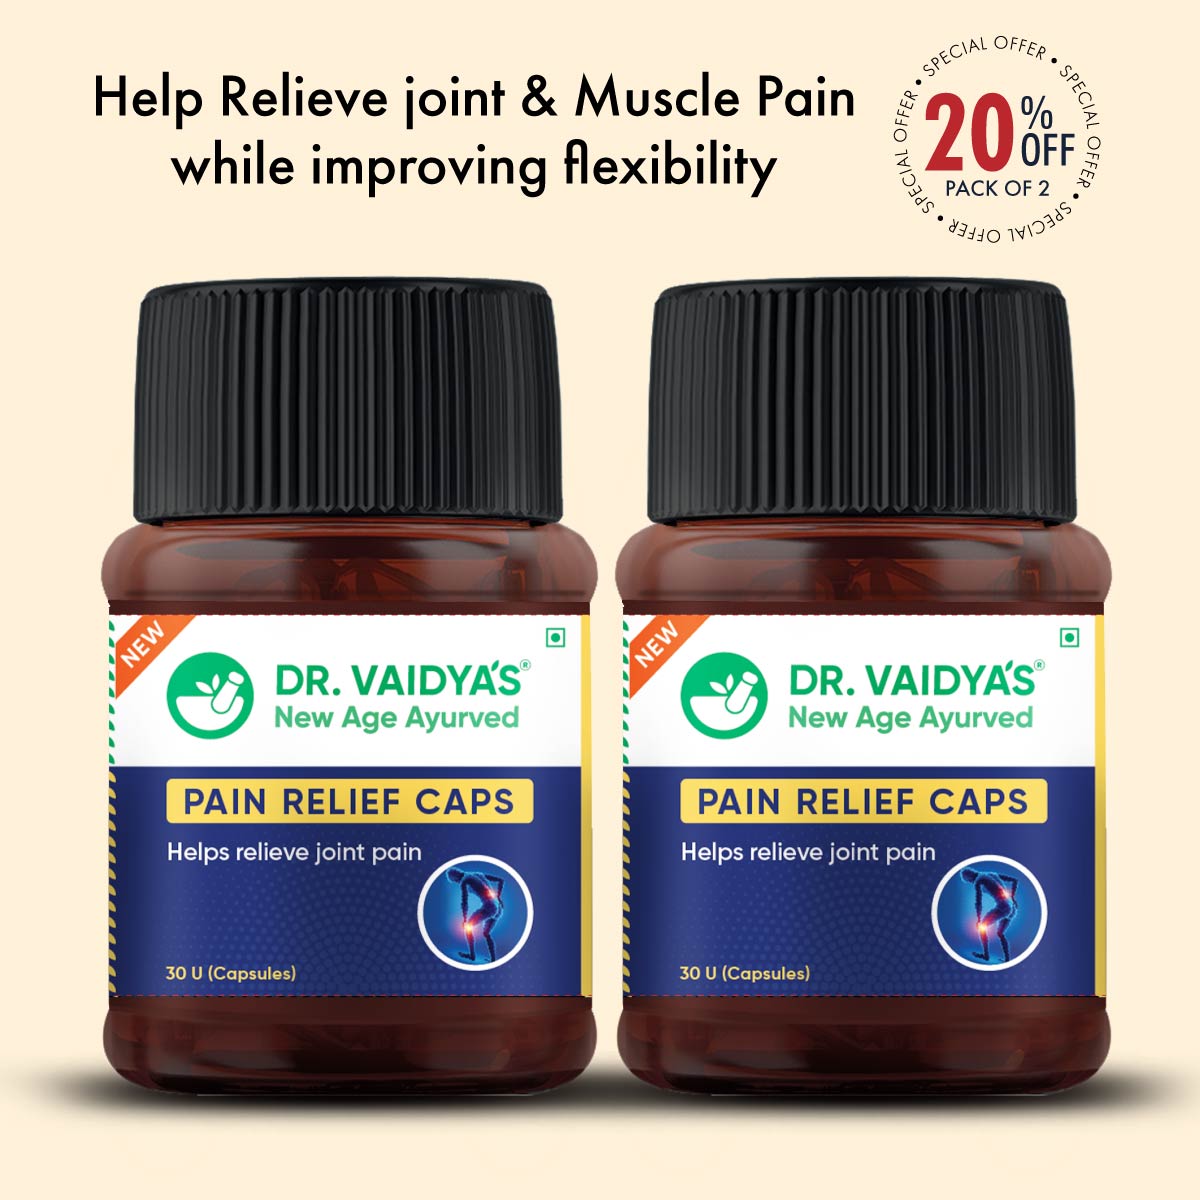 Pain Relief Caps: To Relieve Joint & Muscle Pain